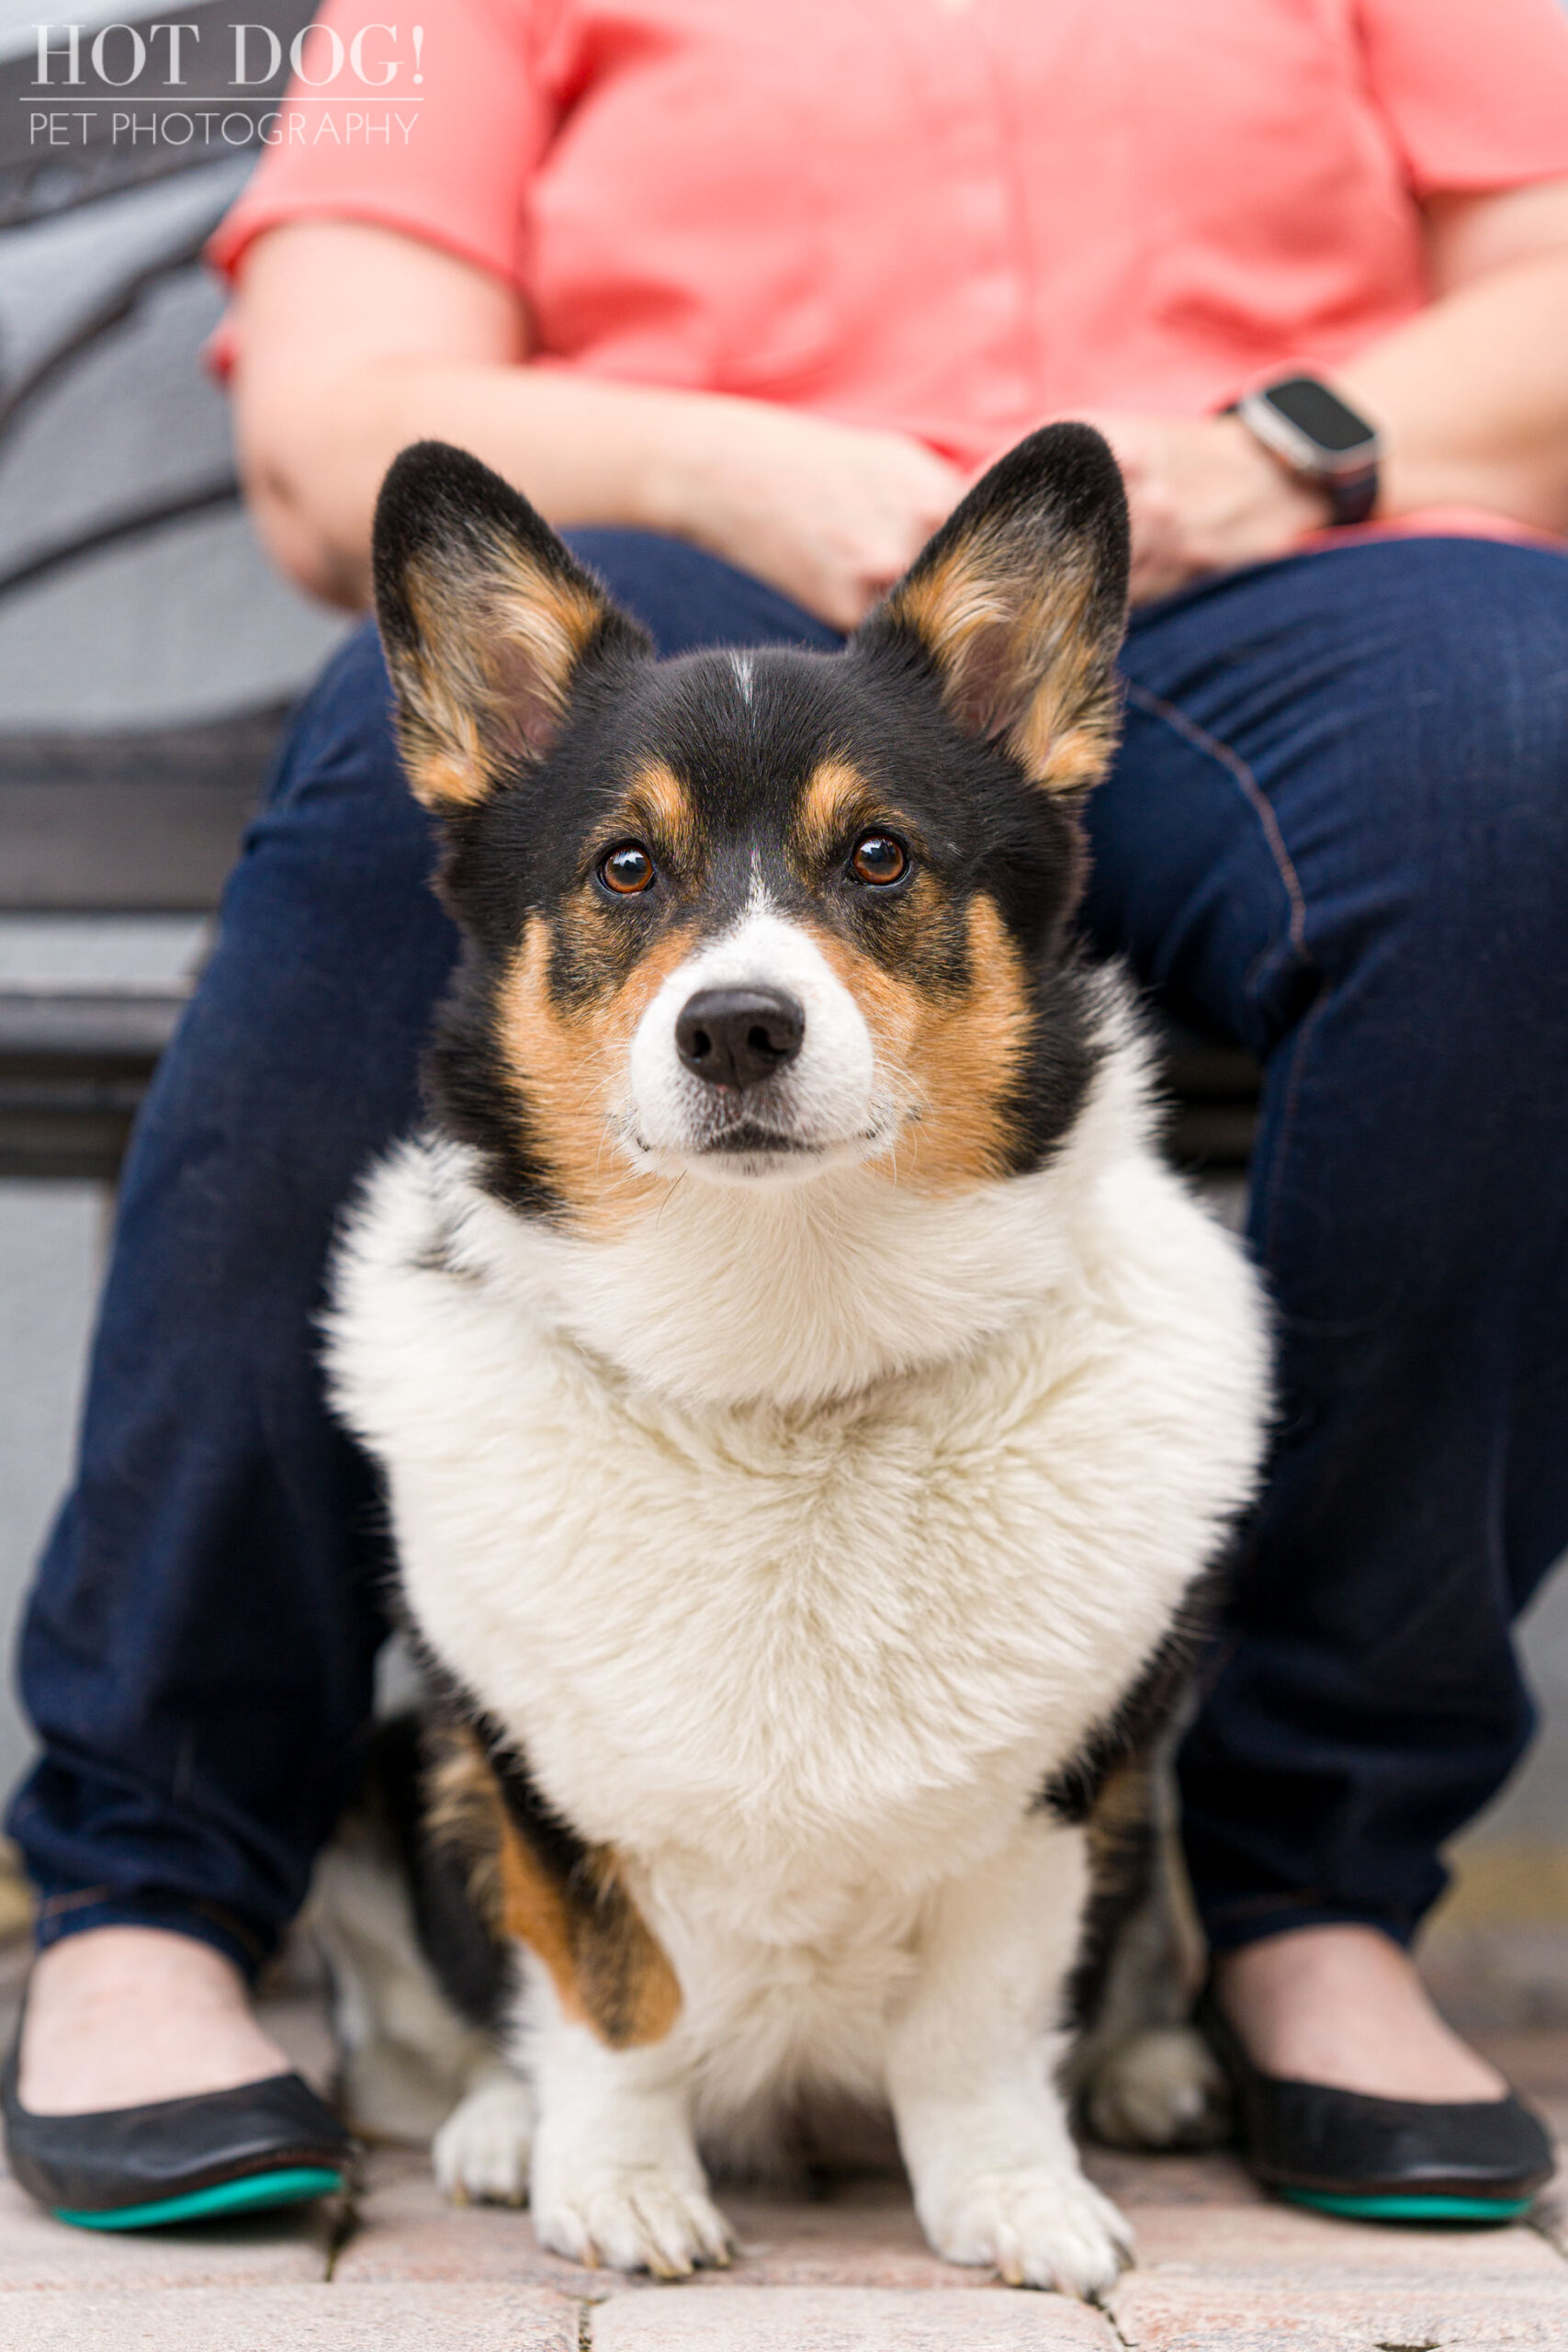 Pet photographer Hot Dog! Pet Photography captures the adorable personality of corgi Snap in this professional photo session.